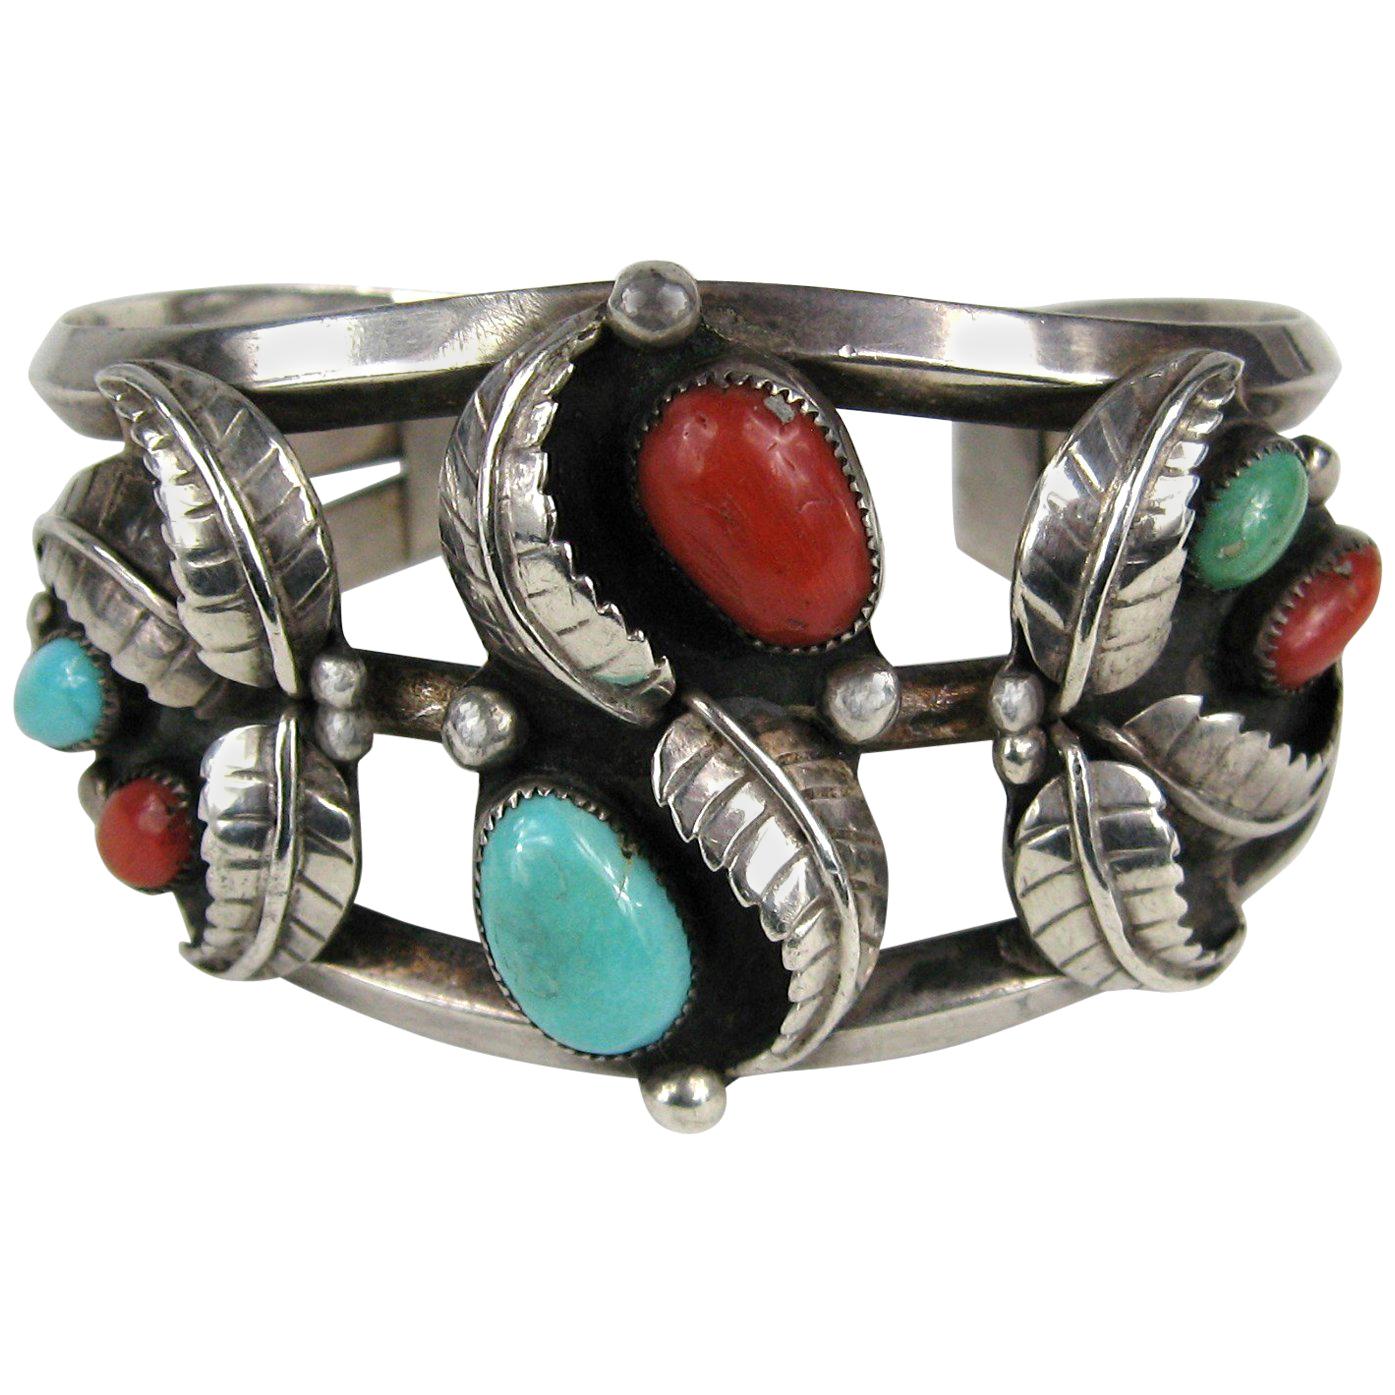 Incredible Vintage Native American Navajo Chunky Coral Sterling Silver Flower Ring Make An Offer!